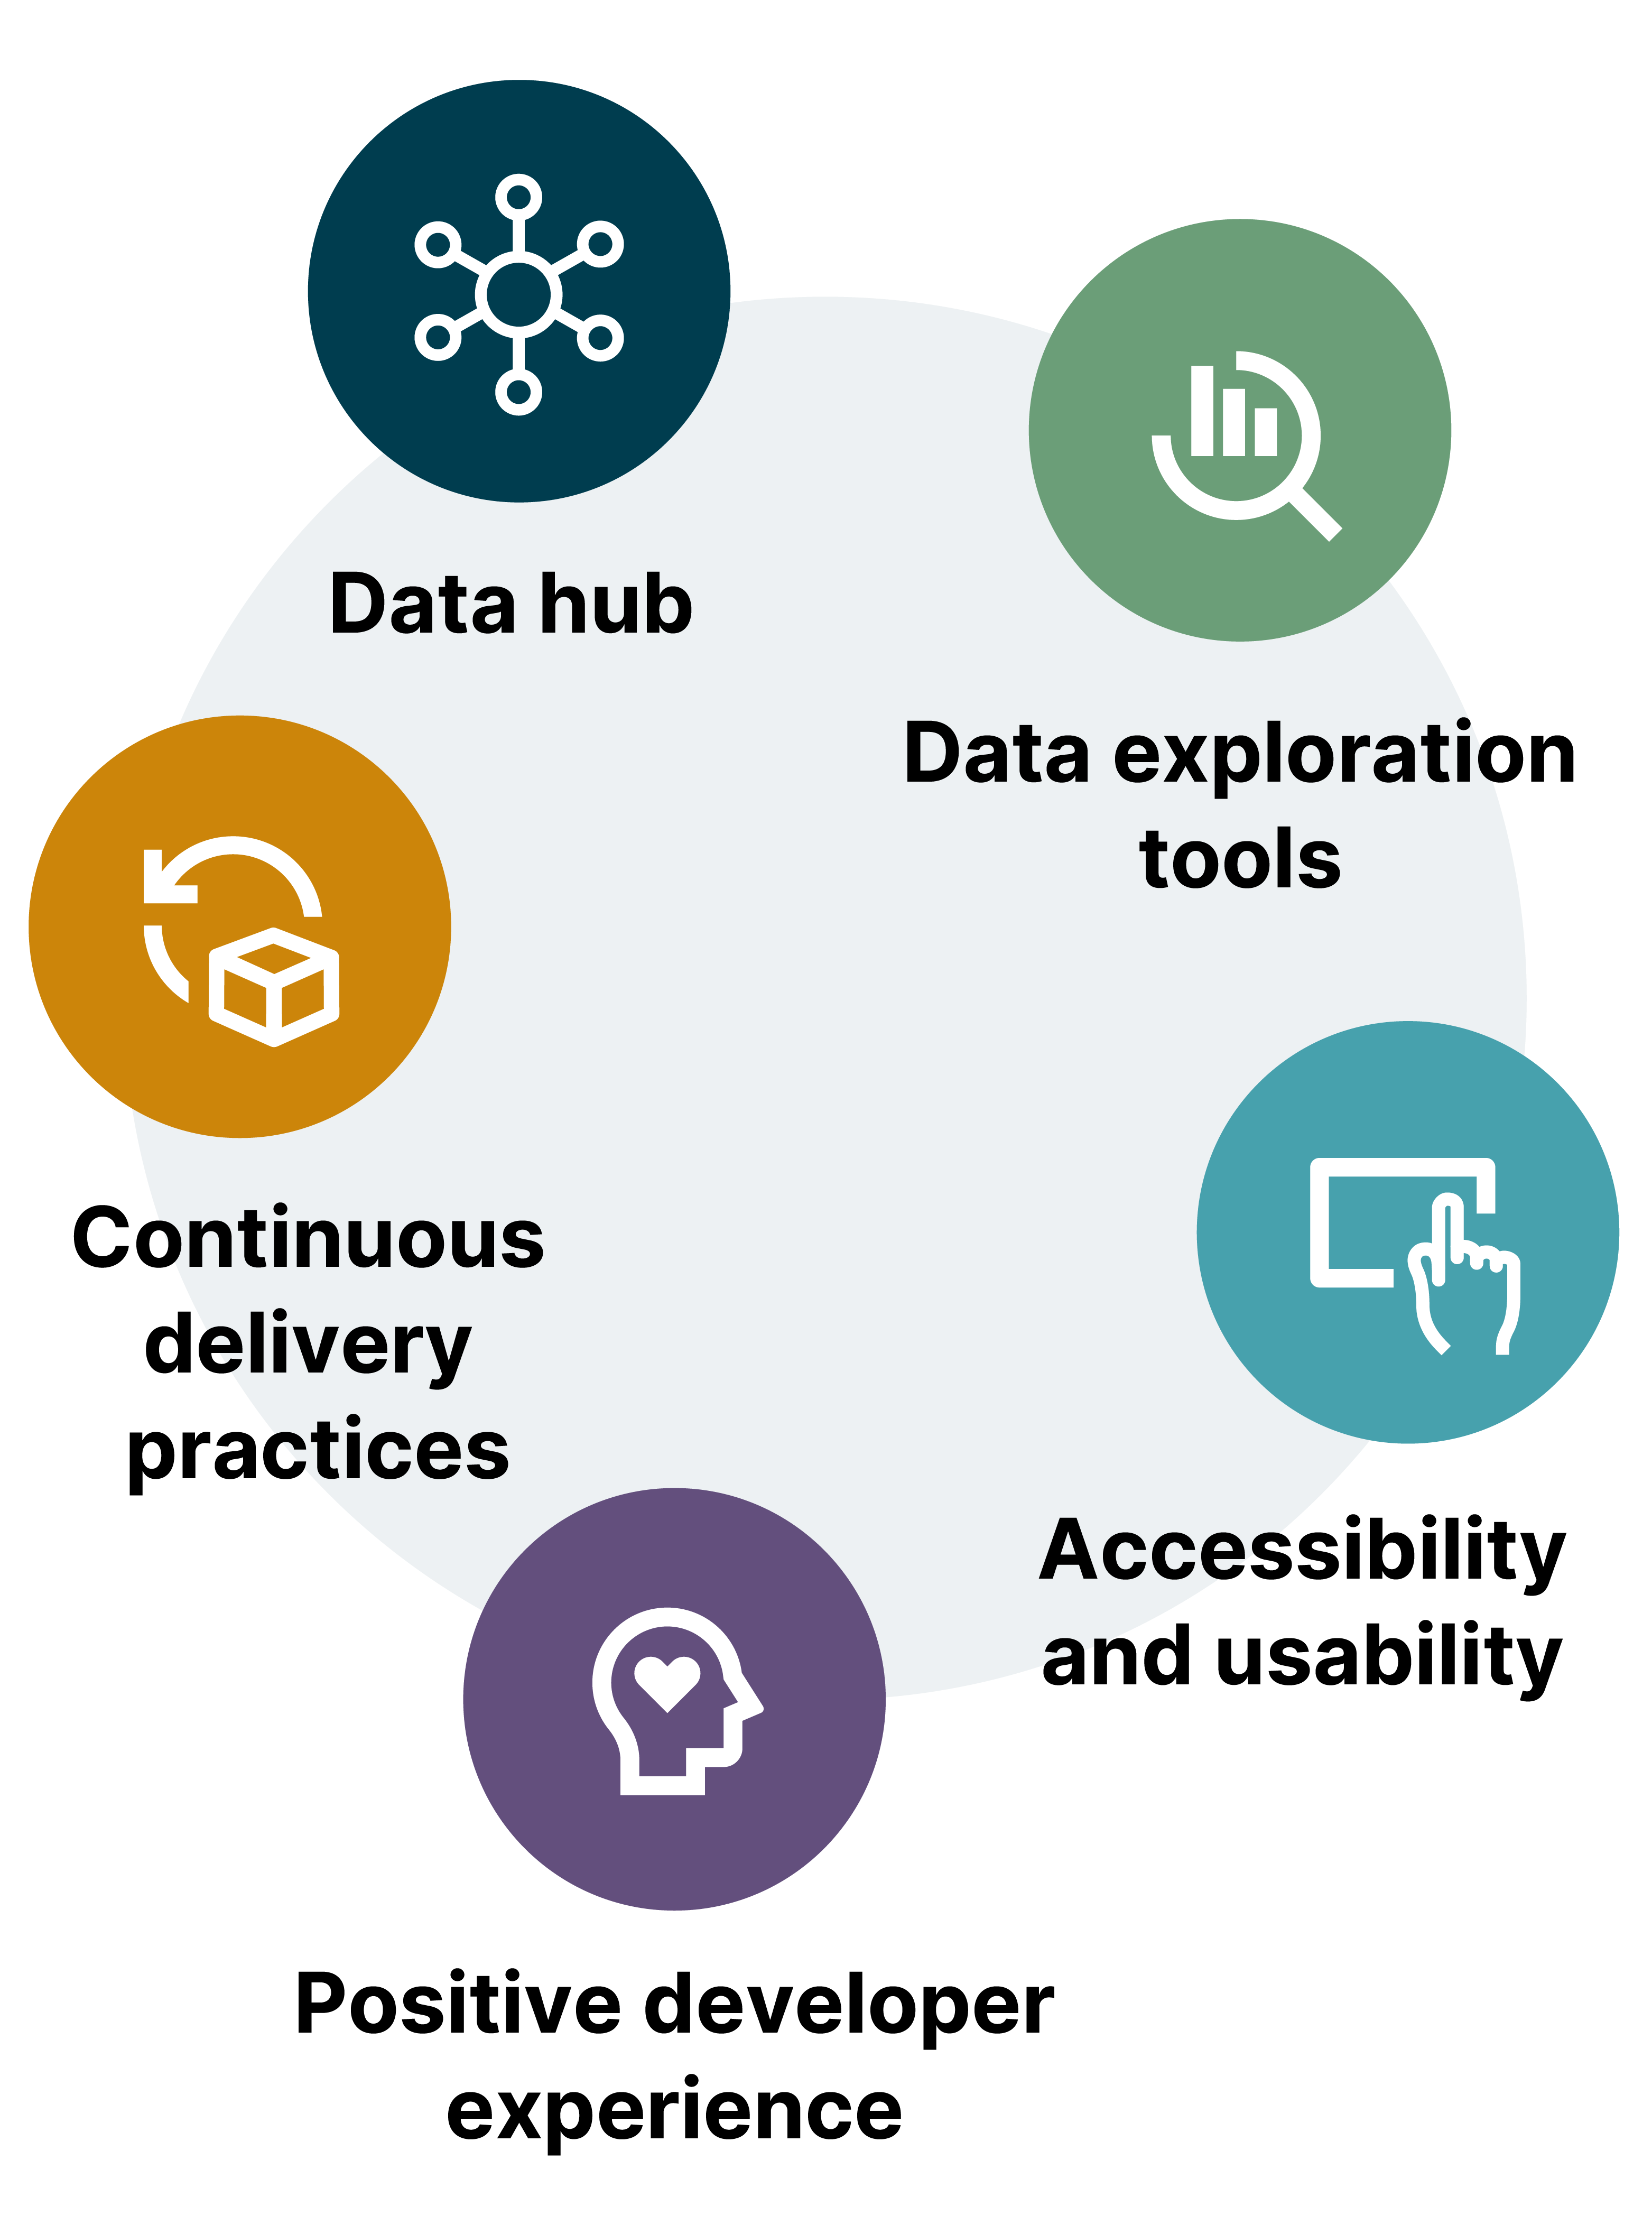 Graphic depicting five circles in the order needed for an AI/ML-ready data foundation. First a data hub, then data exploration tools, accessibility and usability, positive developer experience, and finally continuous delivery practices.